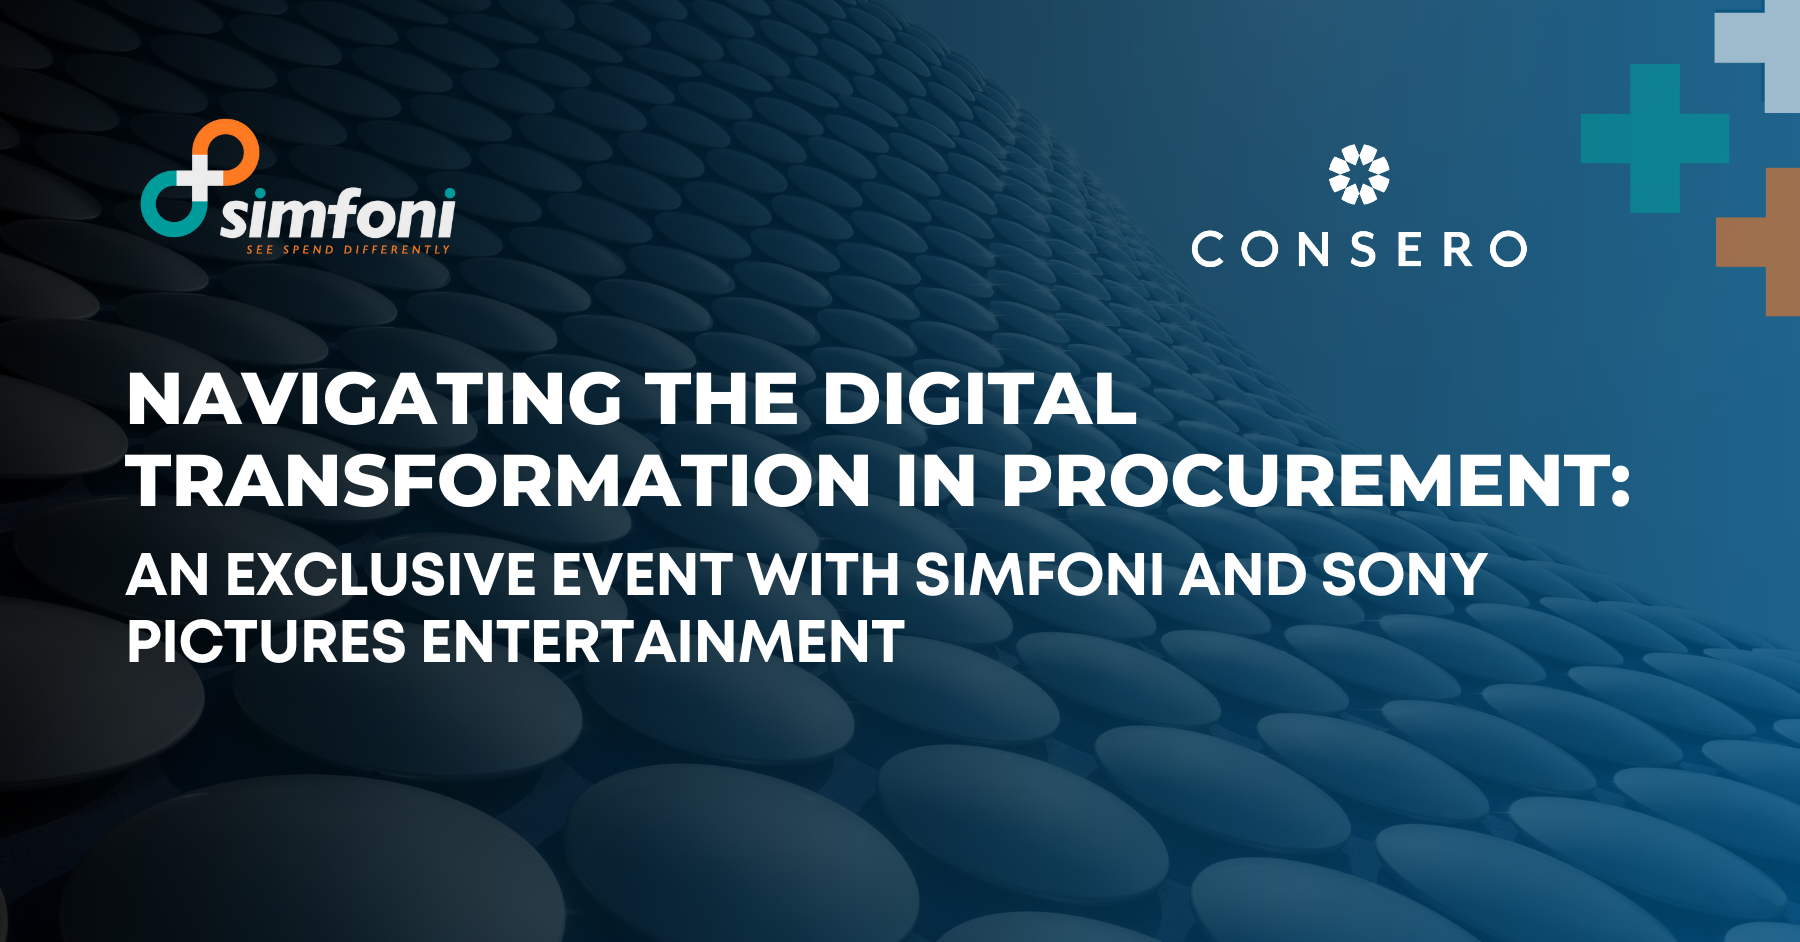 Navigating the Digital Transformation in Procurement: An Exclusive Event with Simfoni and Sony Pictures Entertainment